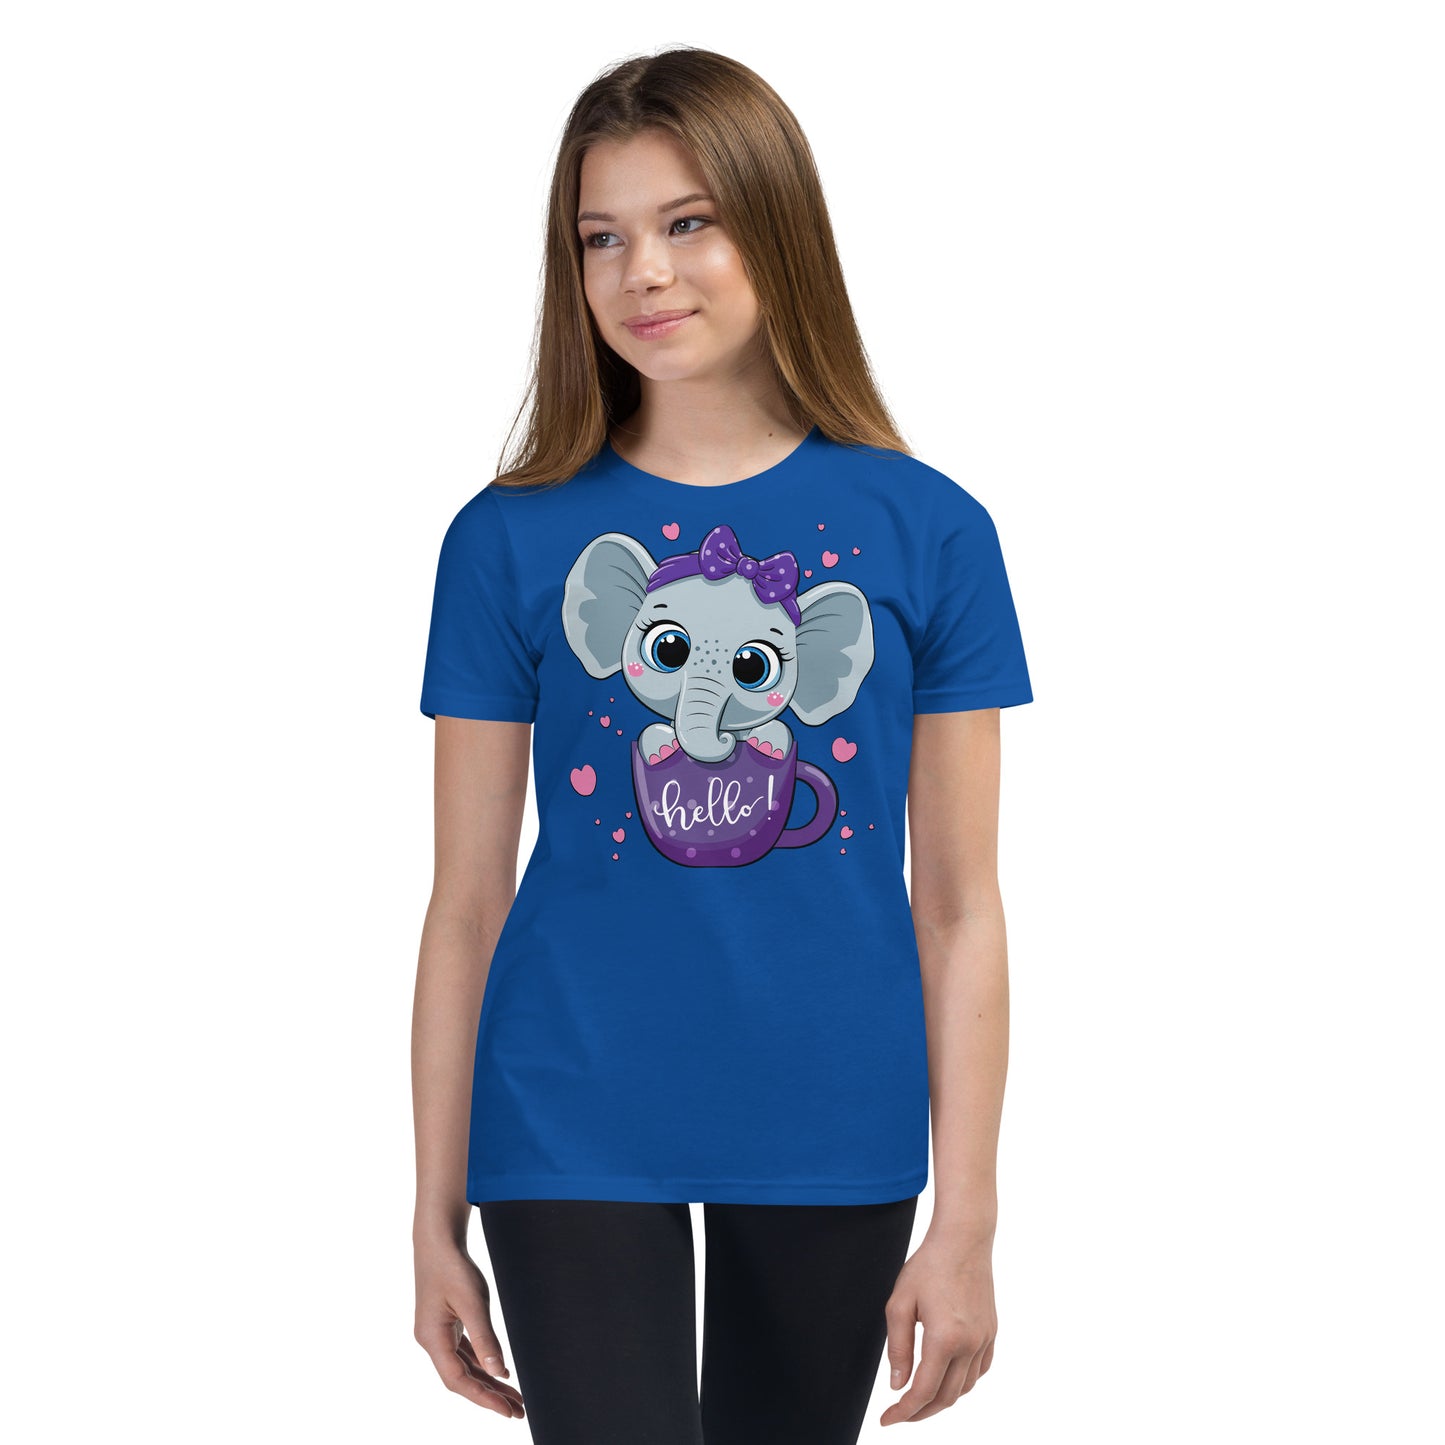 Baby Elephant inside Cup T-shirt, No. 0047